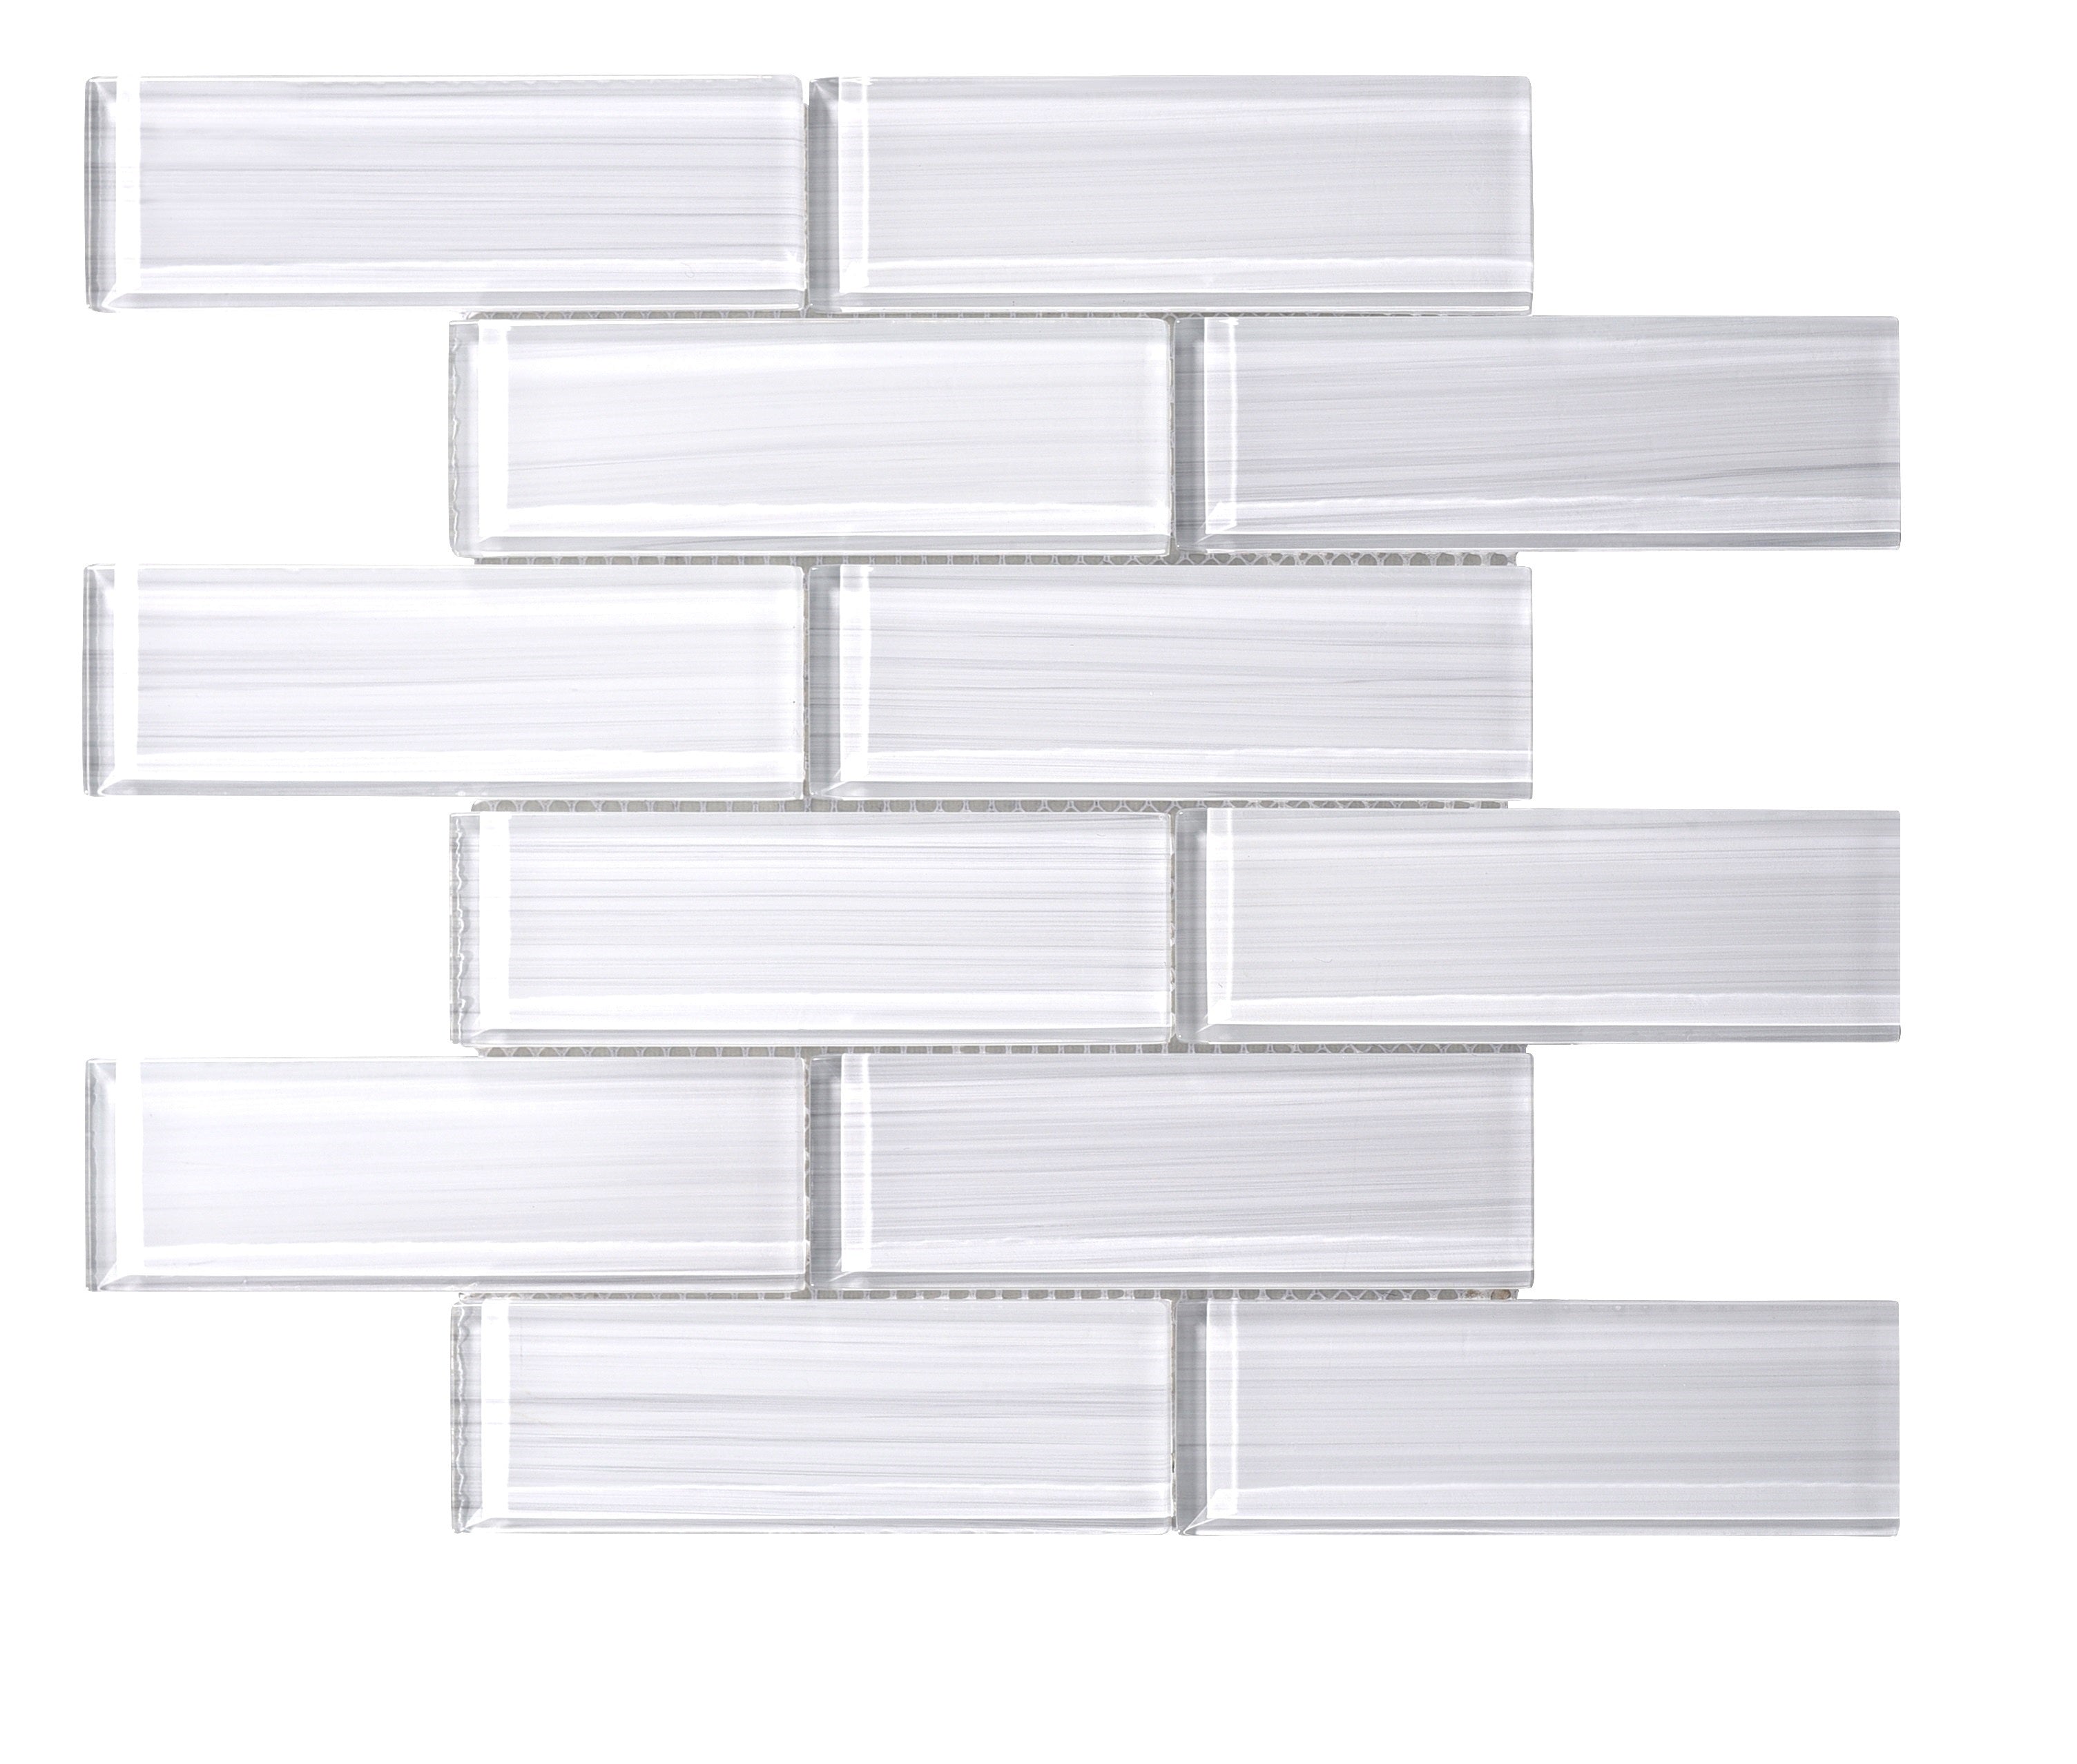 Hand Painted 2" x 6" Glass Mosaic Subway Tile, Backsplash for Kitchen and Bathroom - 5 Square Feet Per Carton - Hand Painted Super White